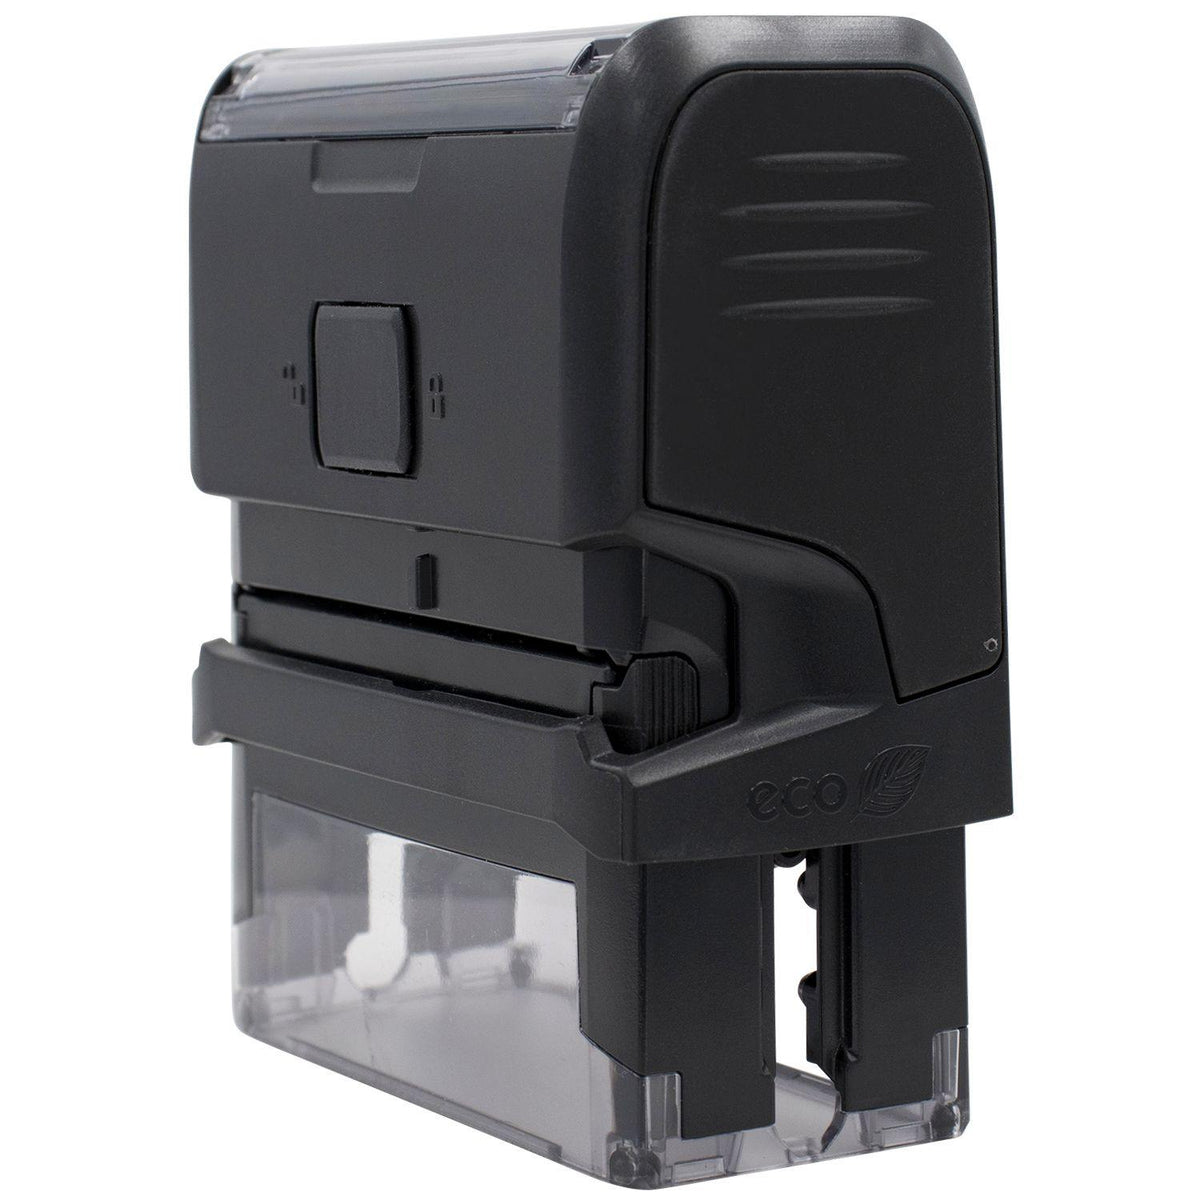 Side View of Large Self Inking Aetna Stamp at an Angle